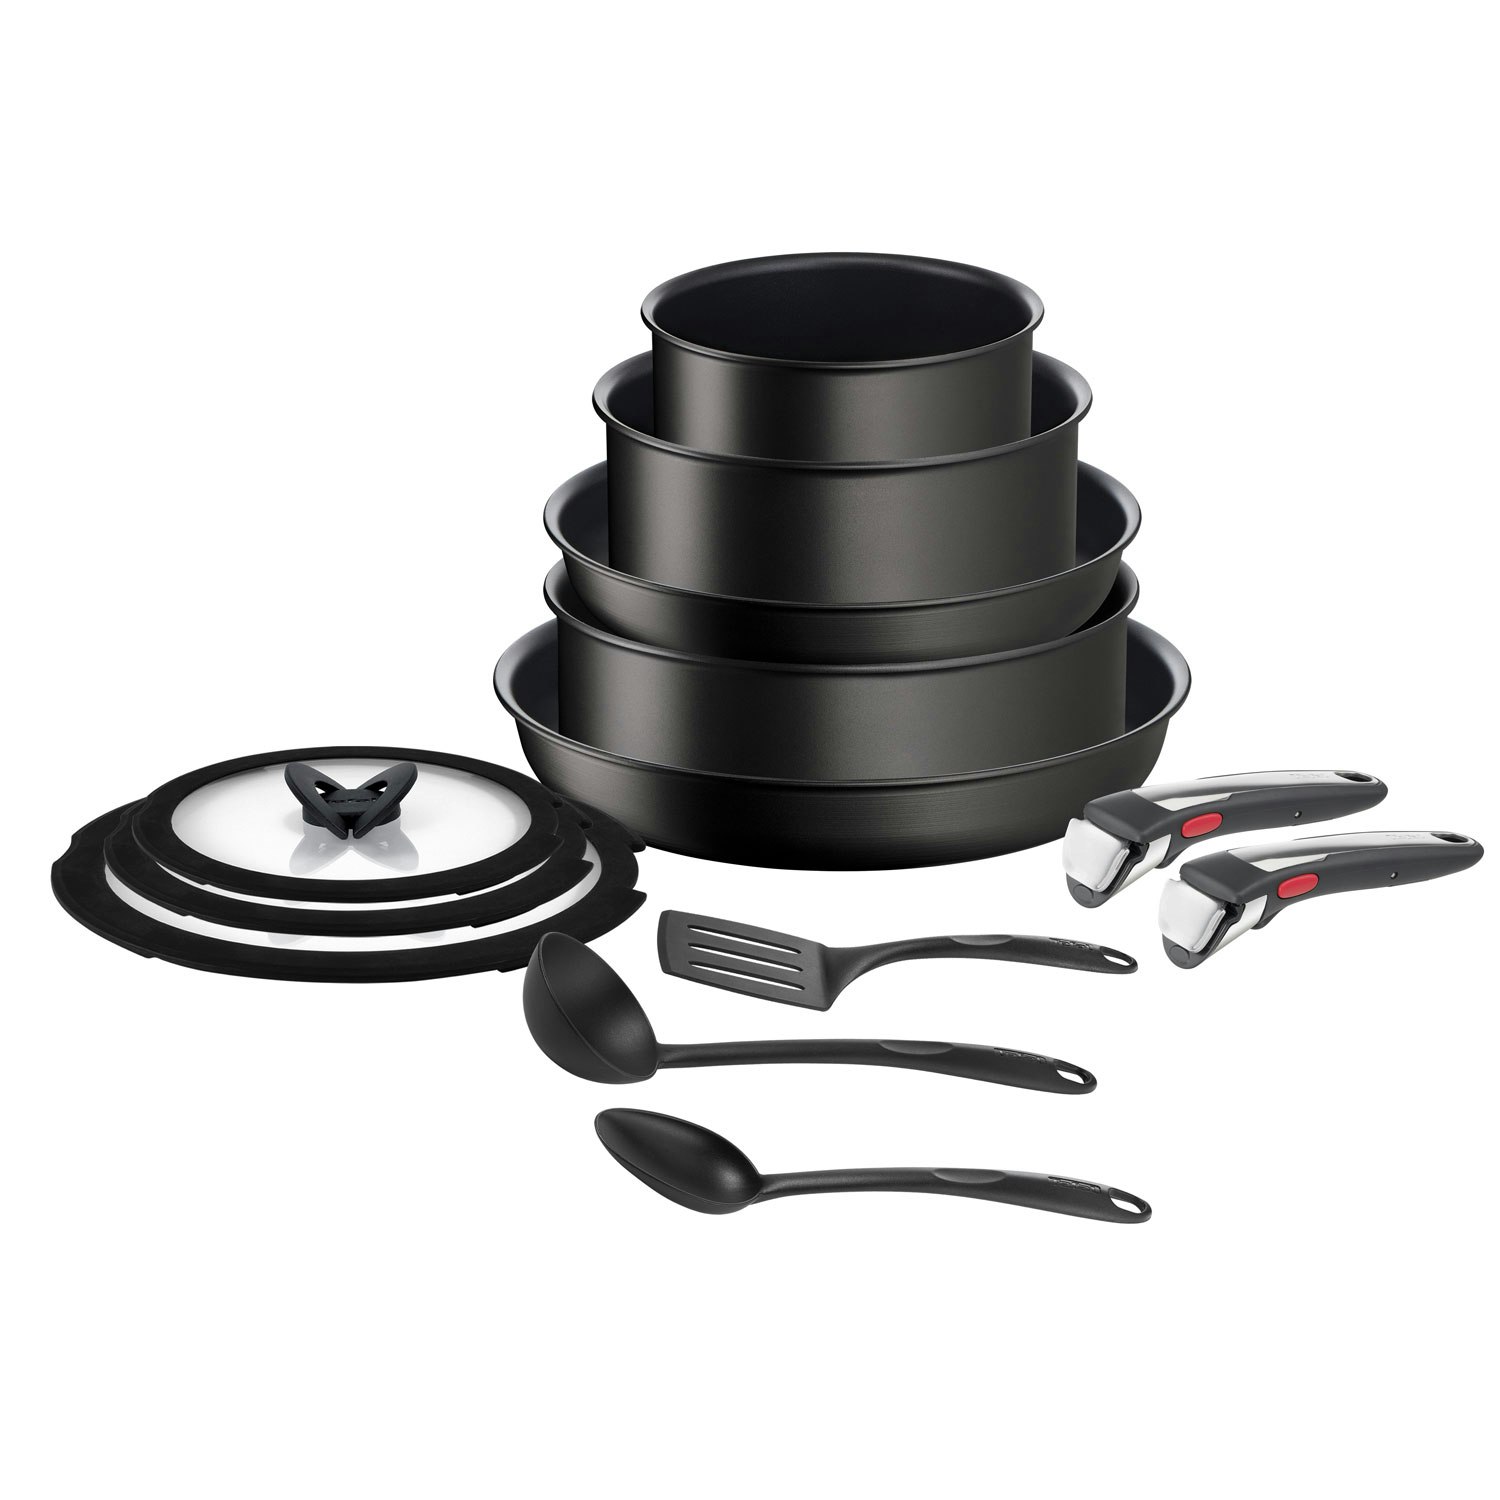 Tefal Ingenio Preference ON Pots & Pans Set, 13 Pieces, Stackable,  Removable Handle, Space Saving, Non-Stick, Induction, Stainless Steel,  L9749432